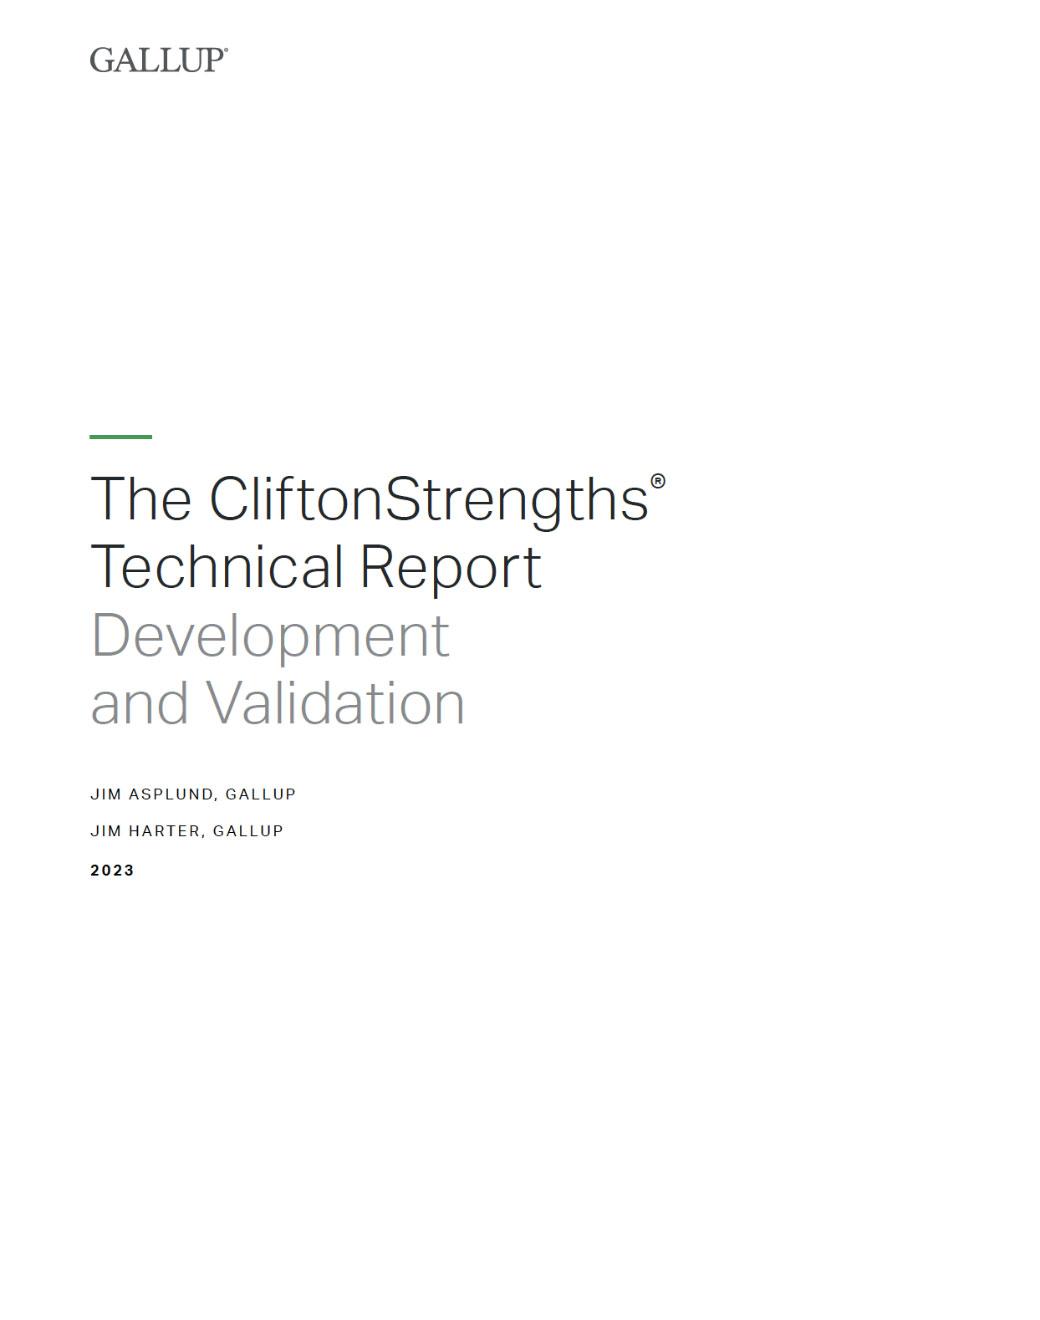 The CliftonStrengths® Technical Report cover